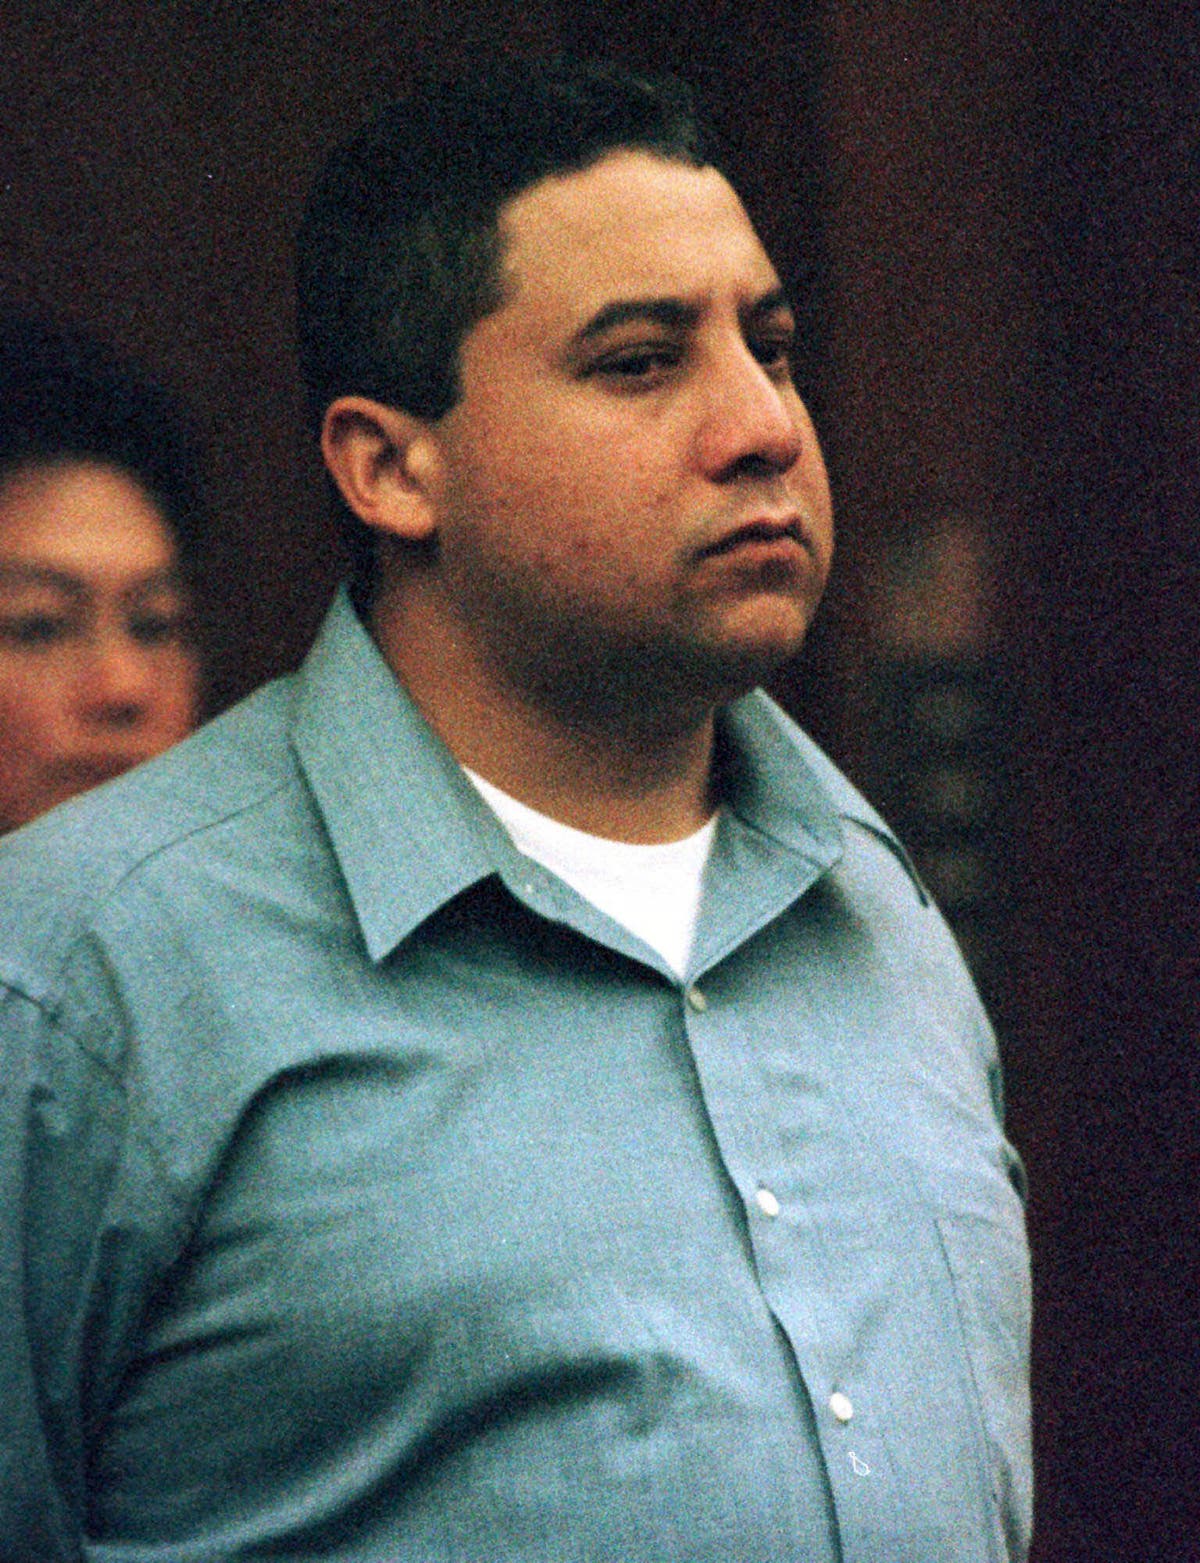 Man who spent 20 years in jail for Hawaii tourist’s rape and murder released after new DNA test 